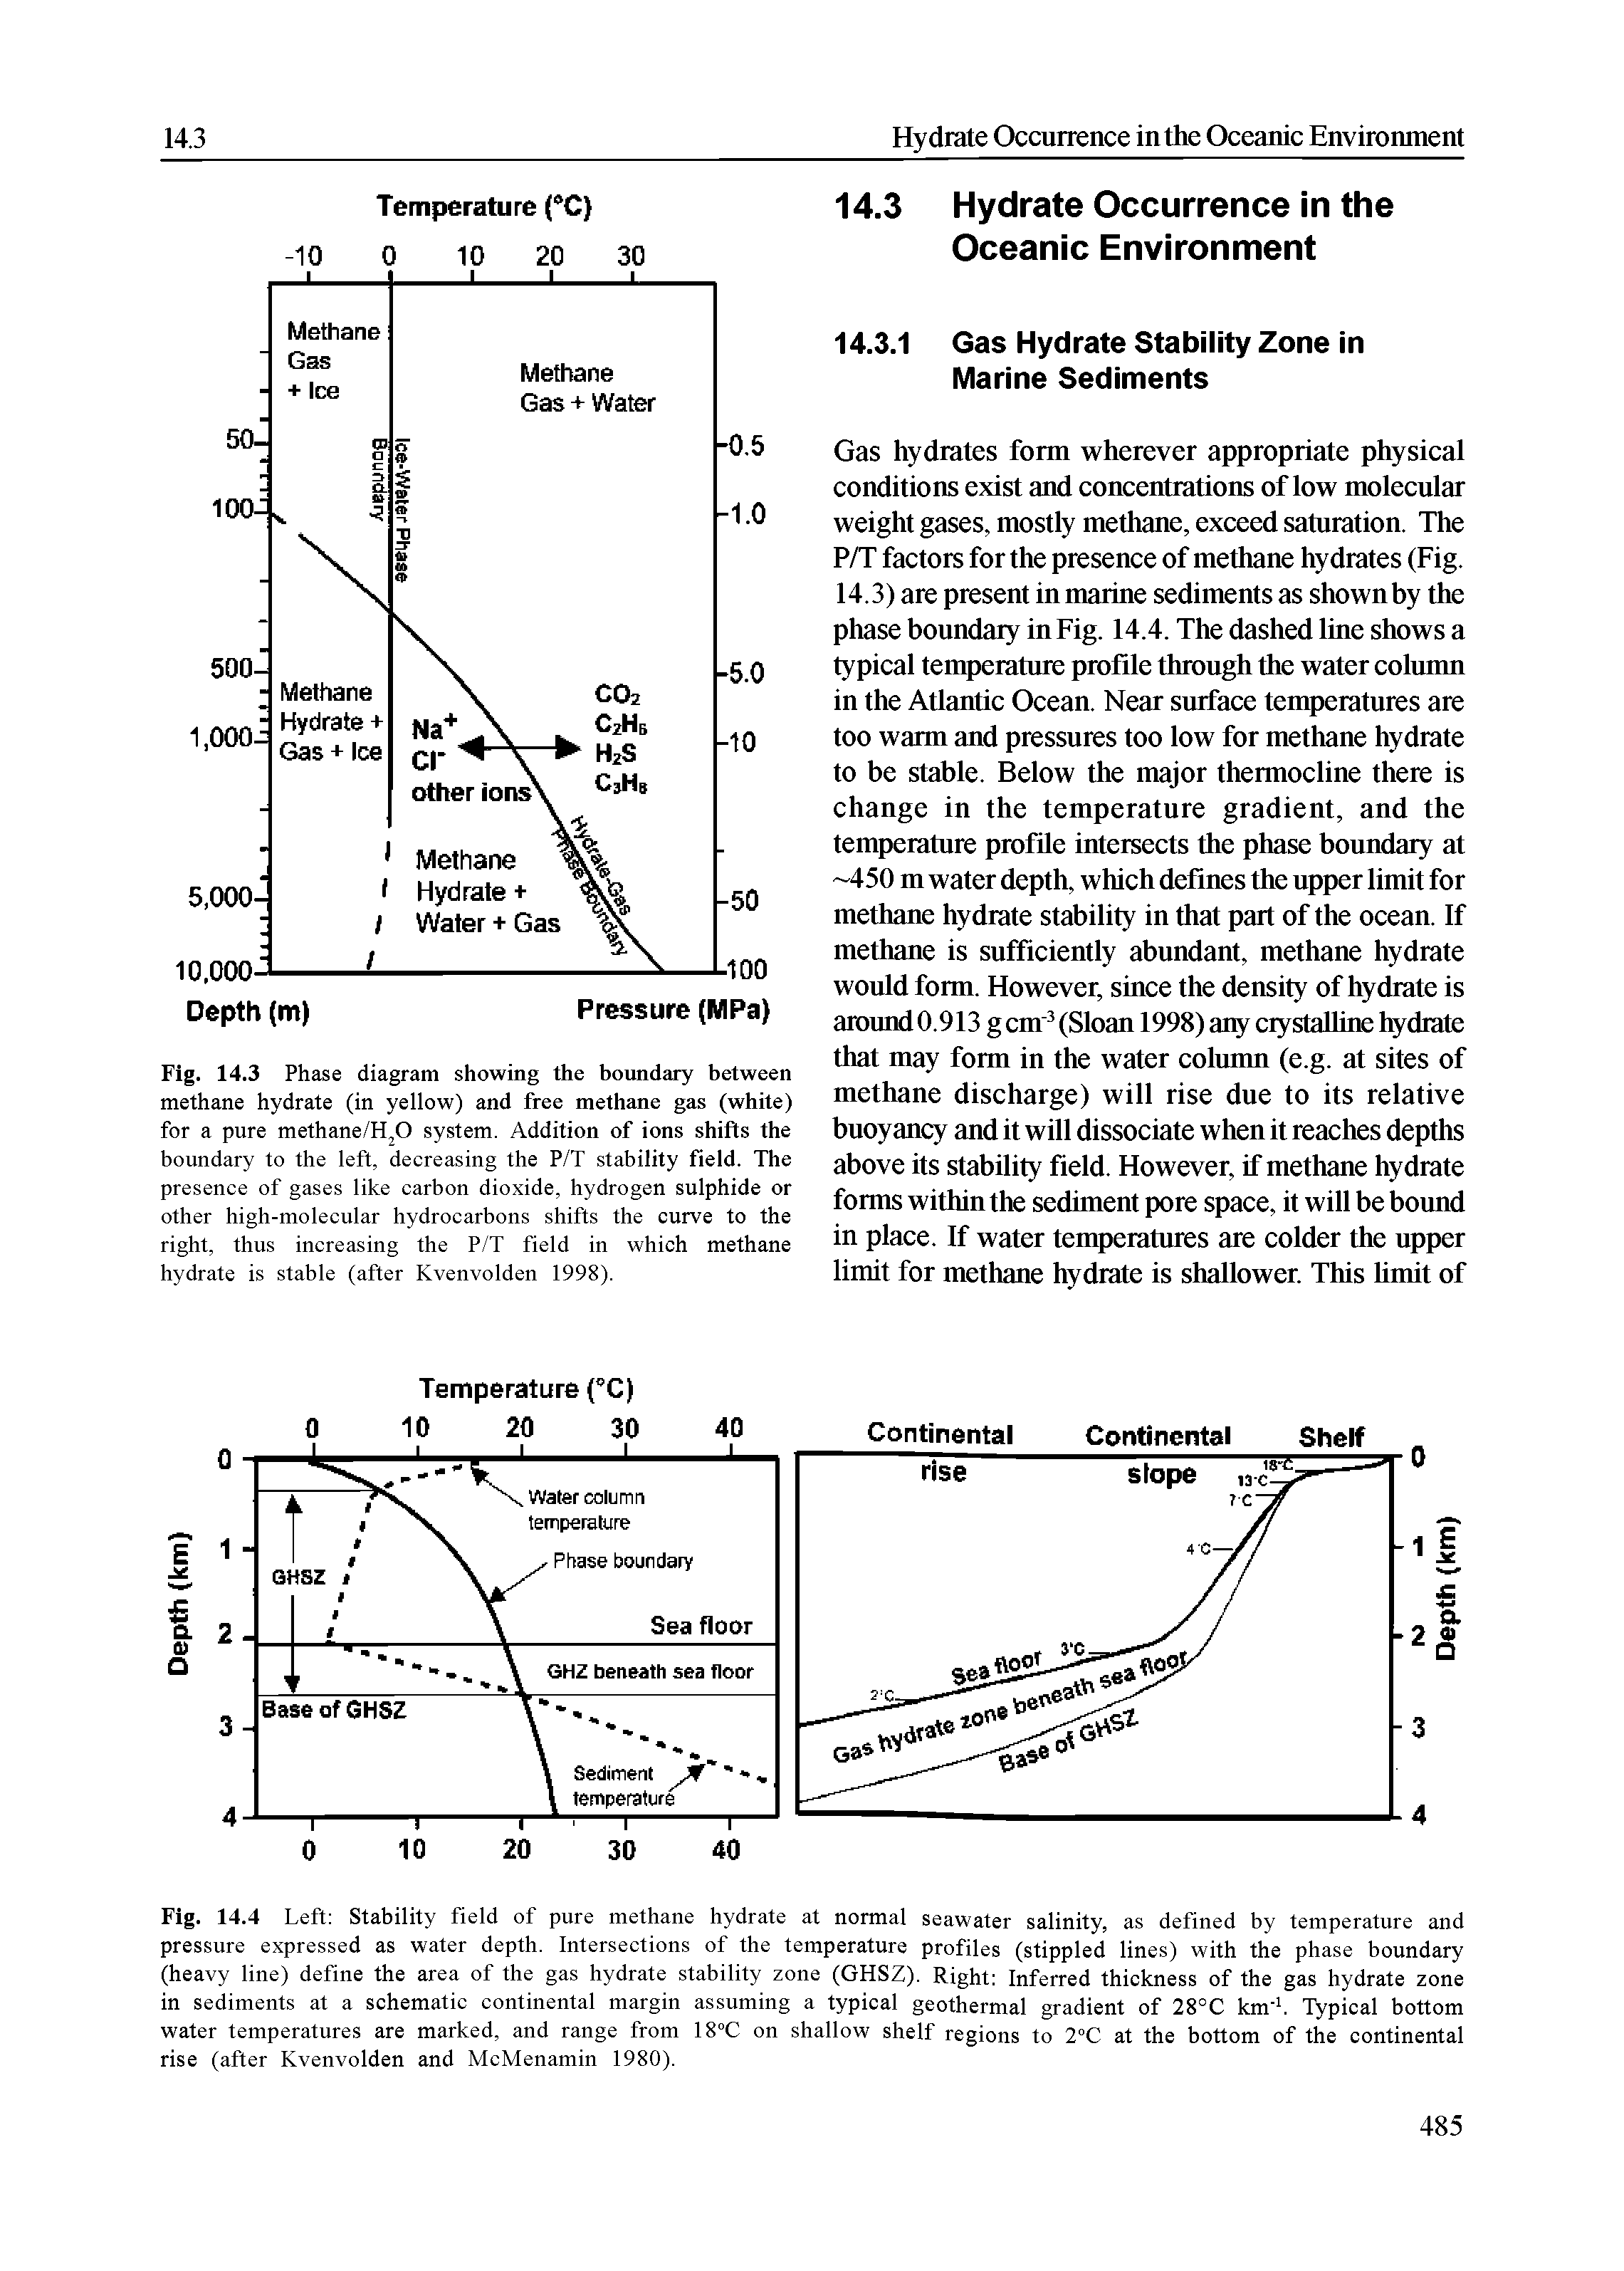 Fig. 14.4 Left Stability field of pure methane hydrate at normal seawater salinity, as defined by temperature and pressure expressed as water depth. Intersections of the temperature profiles (stippled lines) with the phase boundary (heavy line) define the area of the gas hydrate stability zone (GHSZ). Right Inferred thickness of the gas hydrate zone in sediments at a schematic continental margin assuming a typical geothermal gradient of 28°C km. Typical bottom water temperatures are marked, and range from 18°C on shallow shelf regions to 2°C at the bottom of the continental rise (after Kvenvolden and McMenamin 1980).